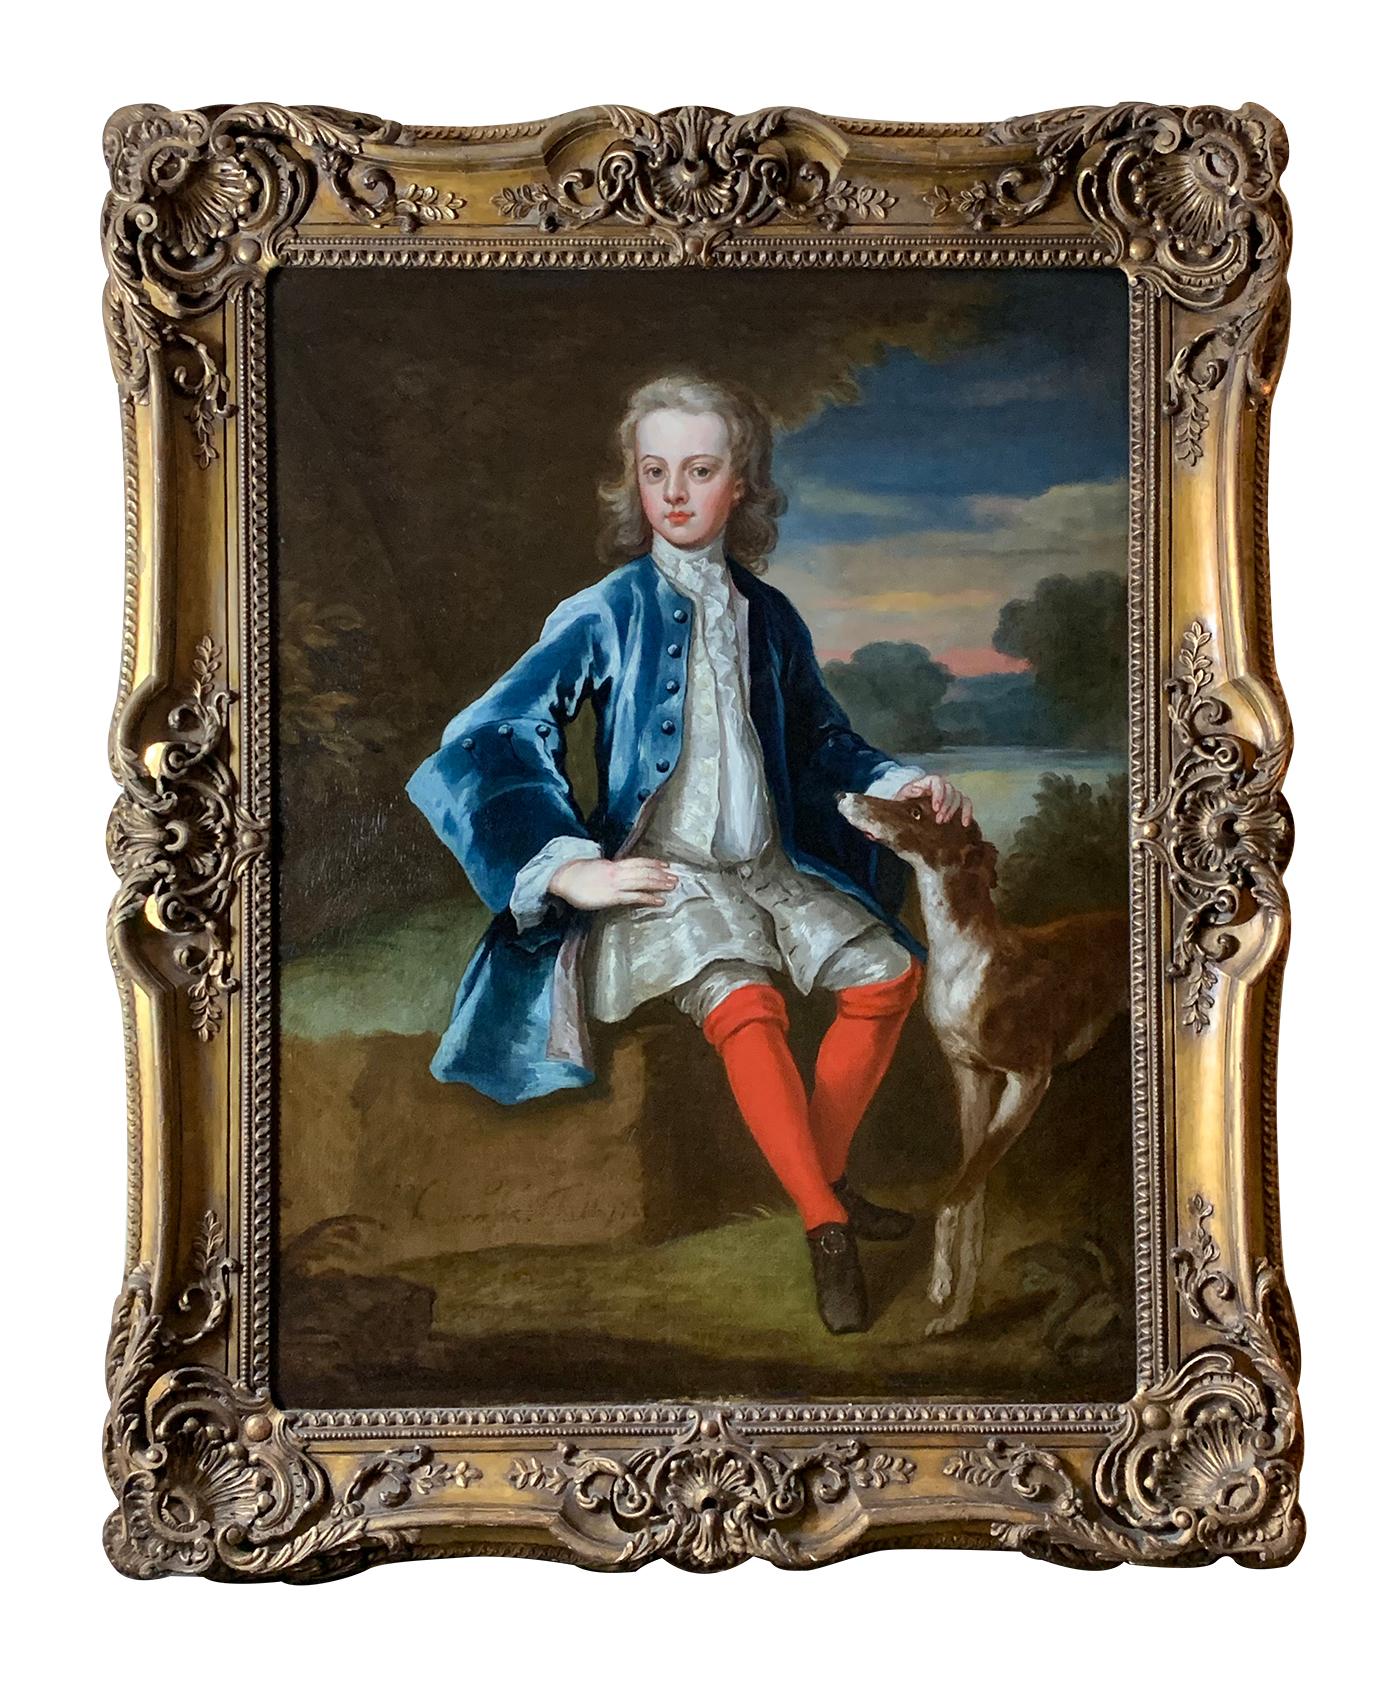 John Vanderbank Portrait Painting - 18th Century English Portrait of a Gentleman in a Blue Coat with his Dog